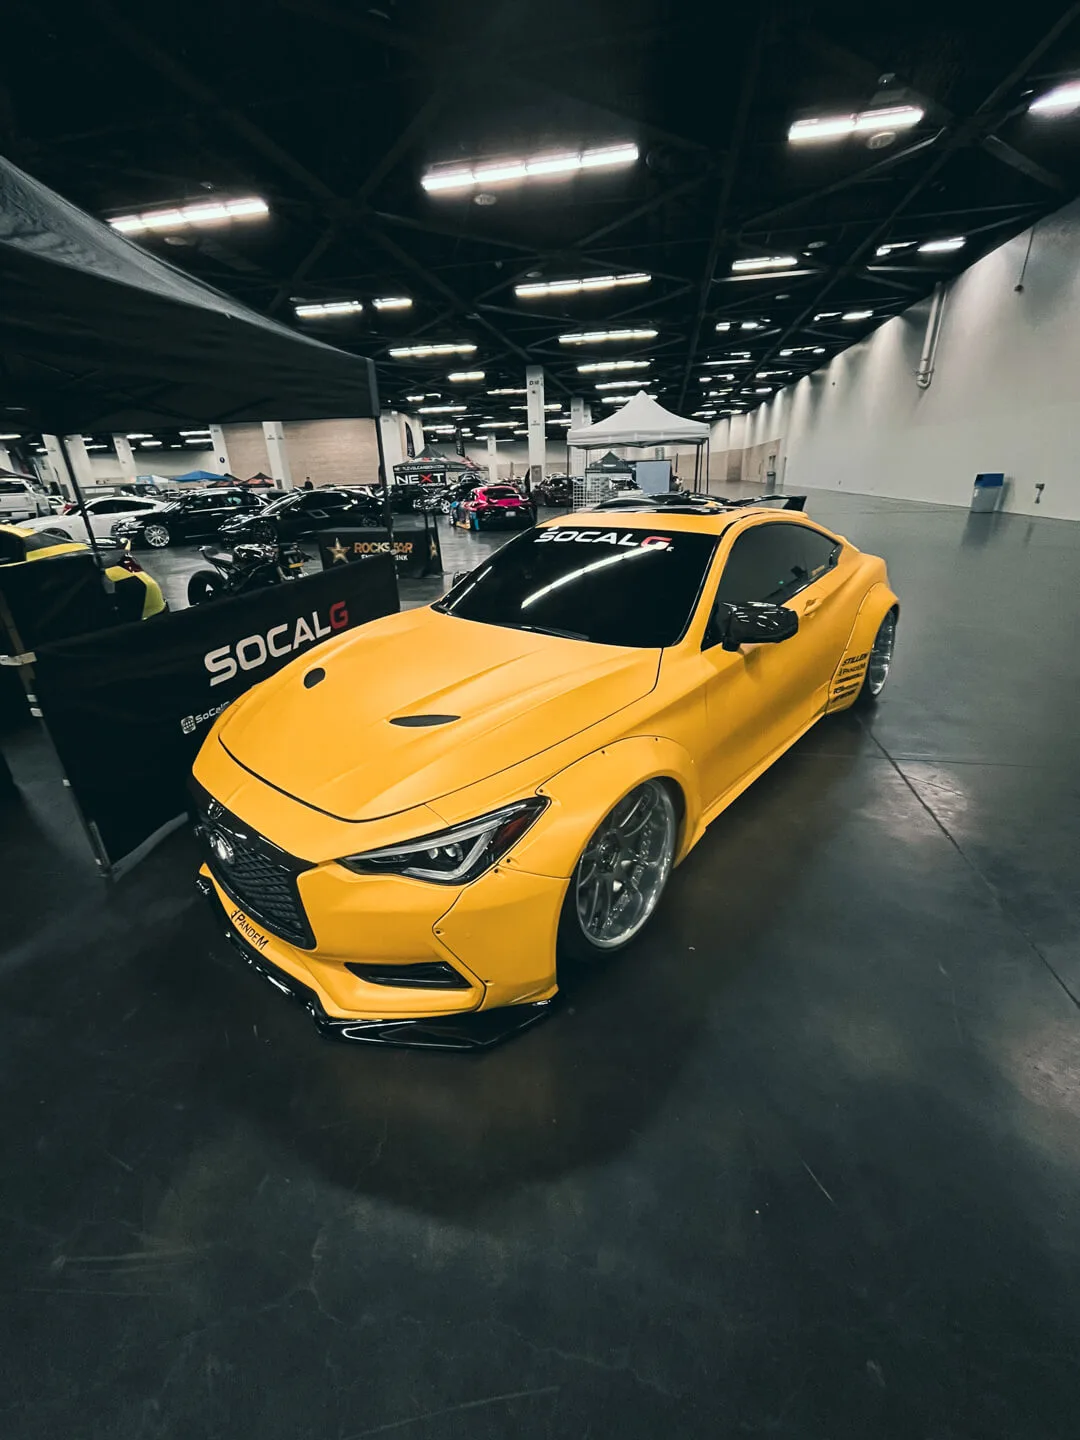 The Amazing Transformation of Erin Rae’s Infiniti Q60 RedSport: A Story of Persistence and Creativity